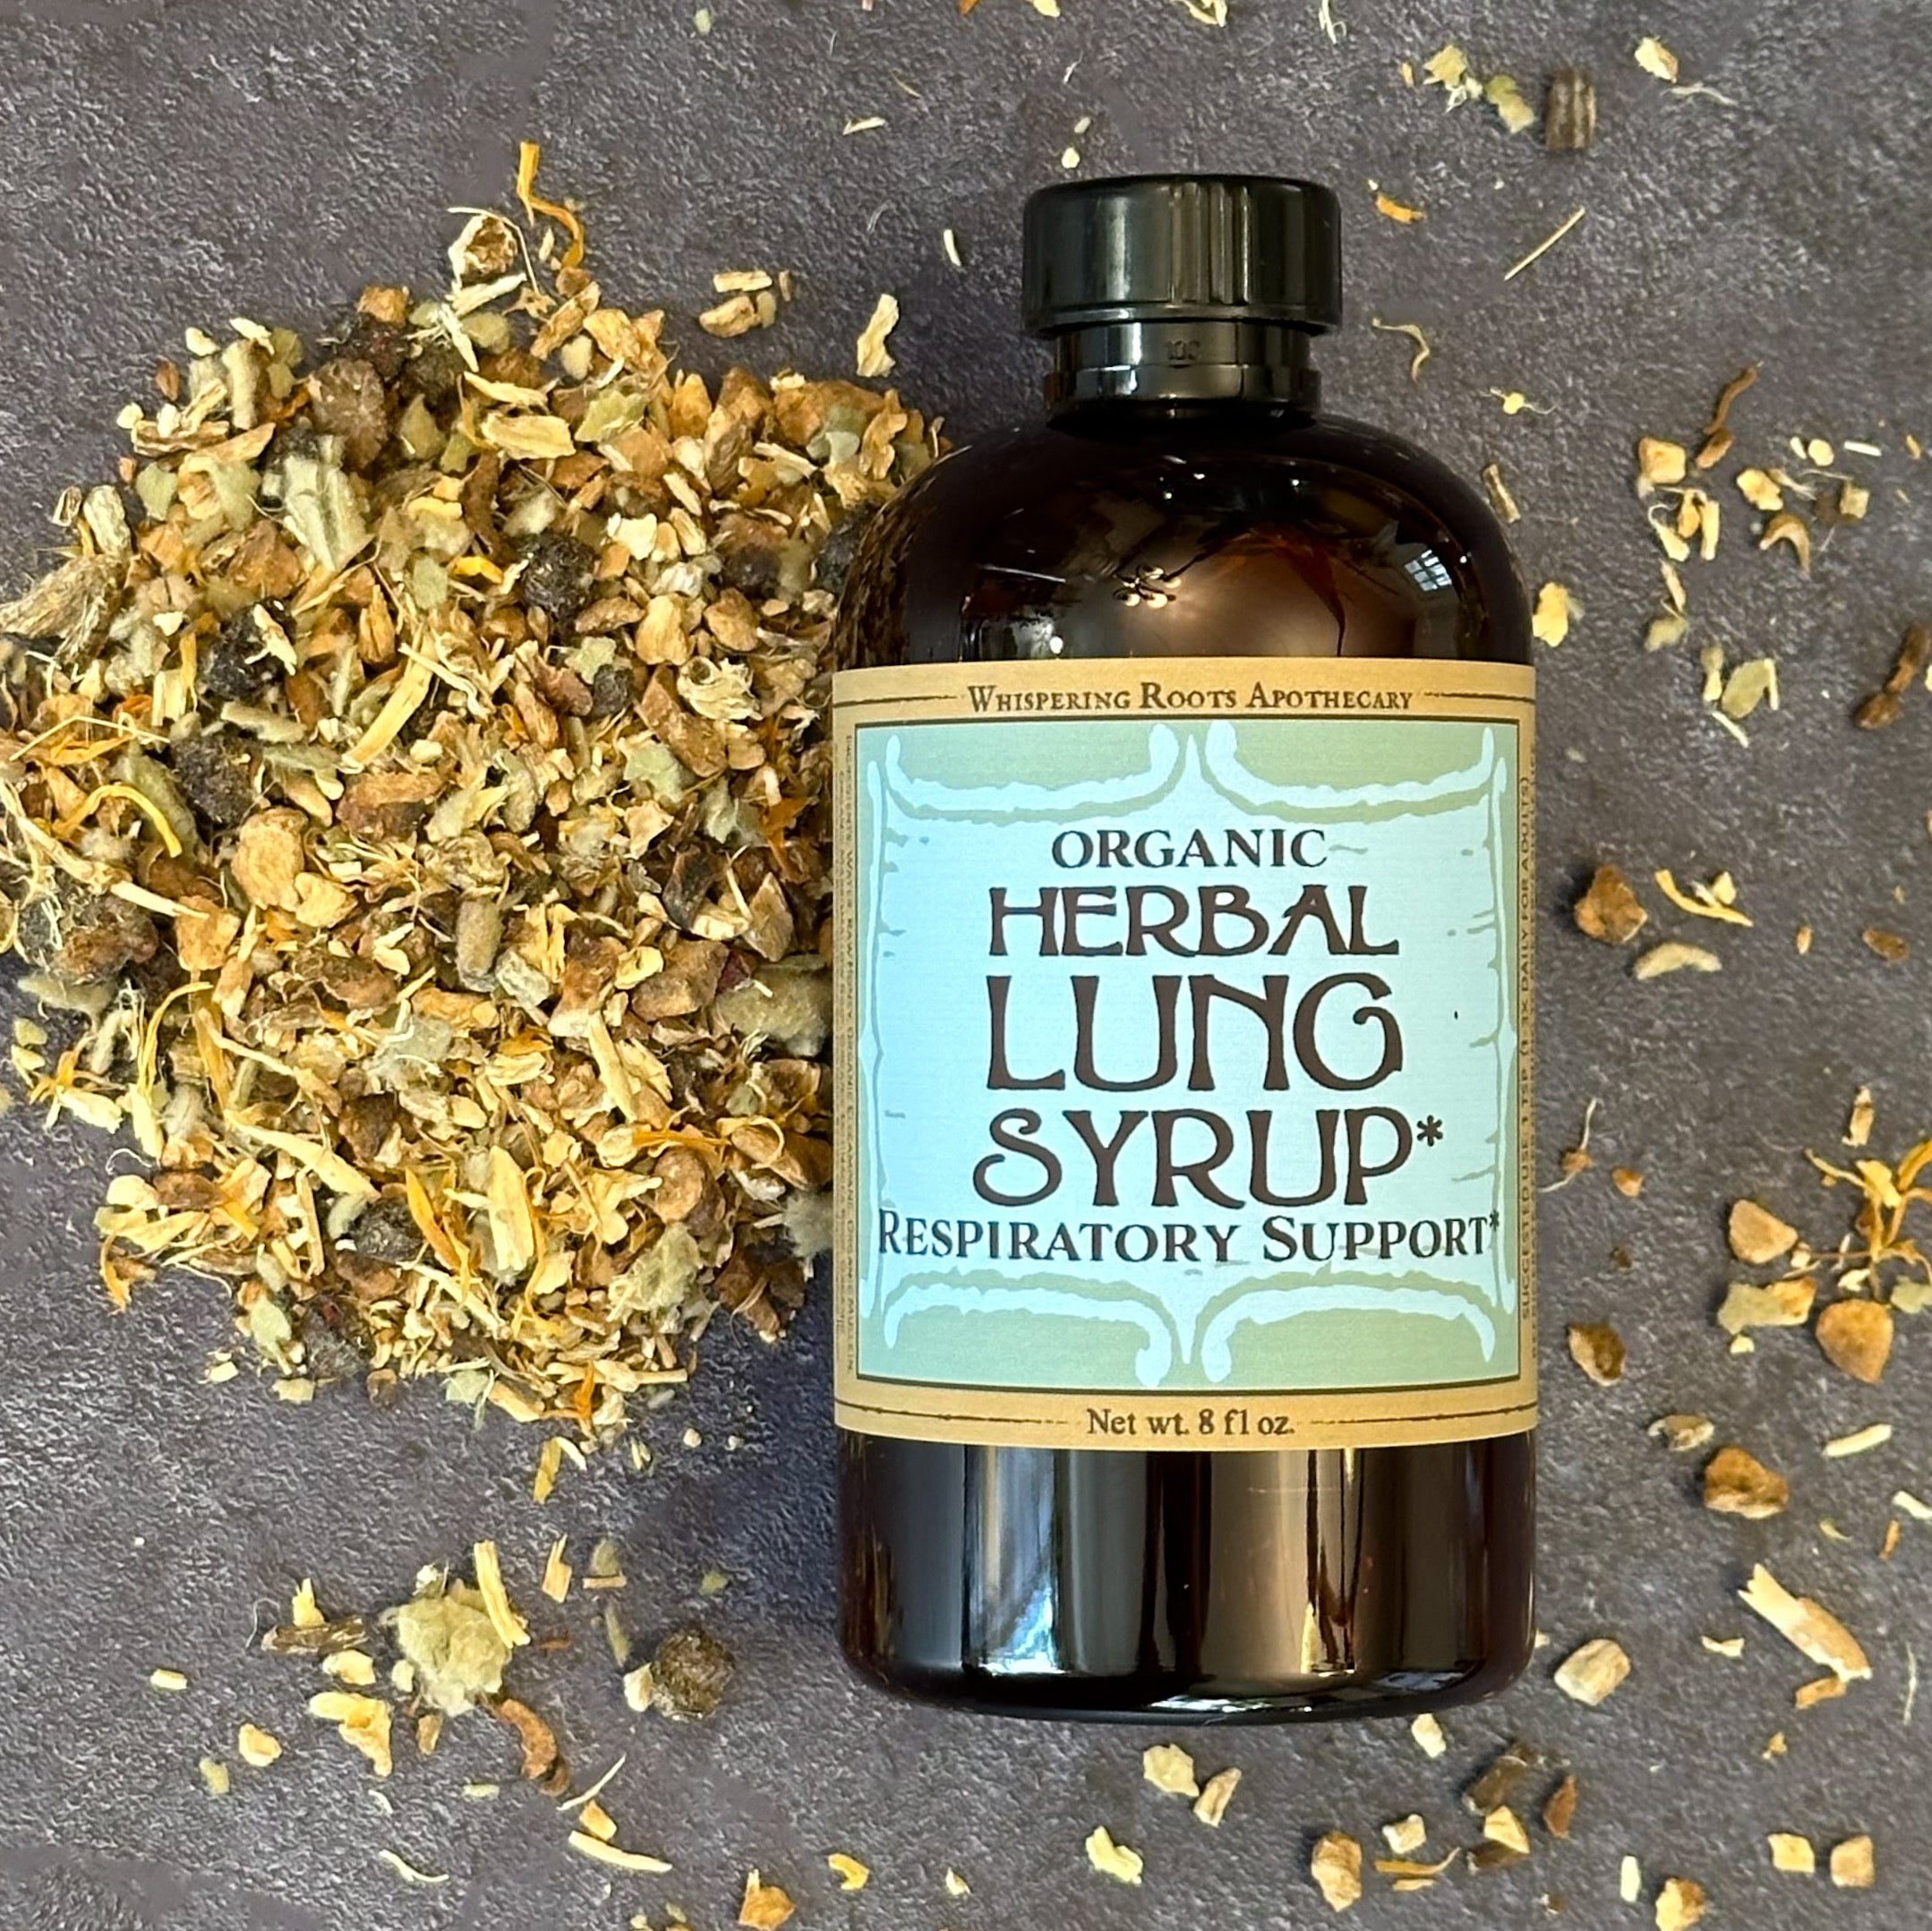 Herbal Lung Syrup*